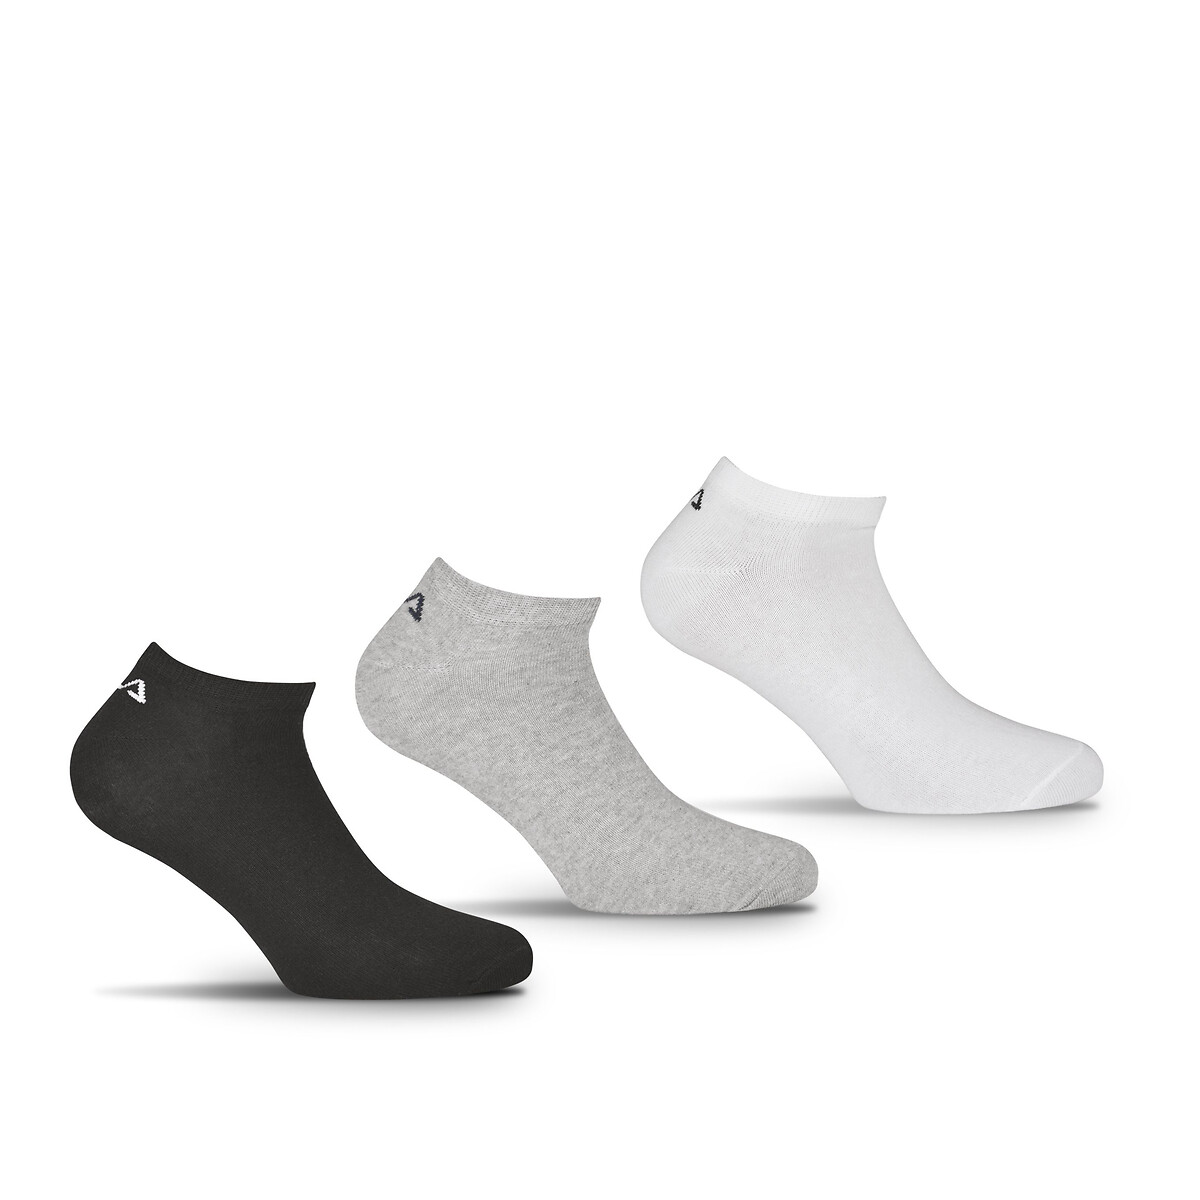 Pack of 6 Pairs of Invisible Plain Socks in Cotton Mix